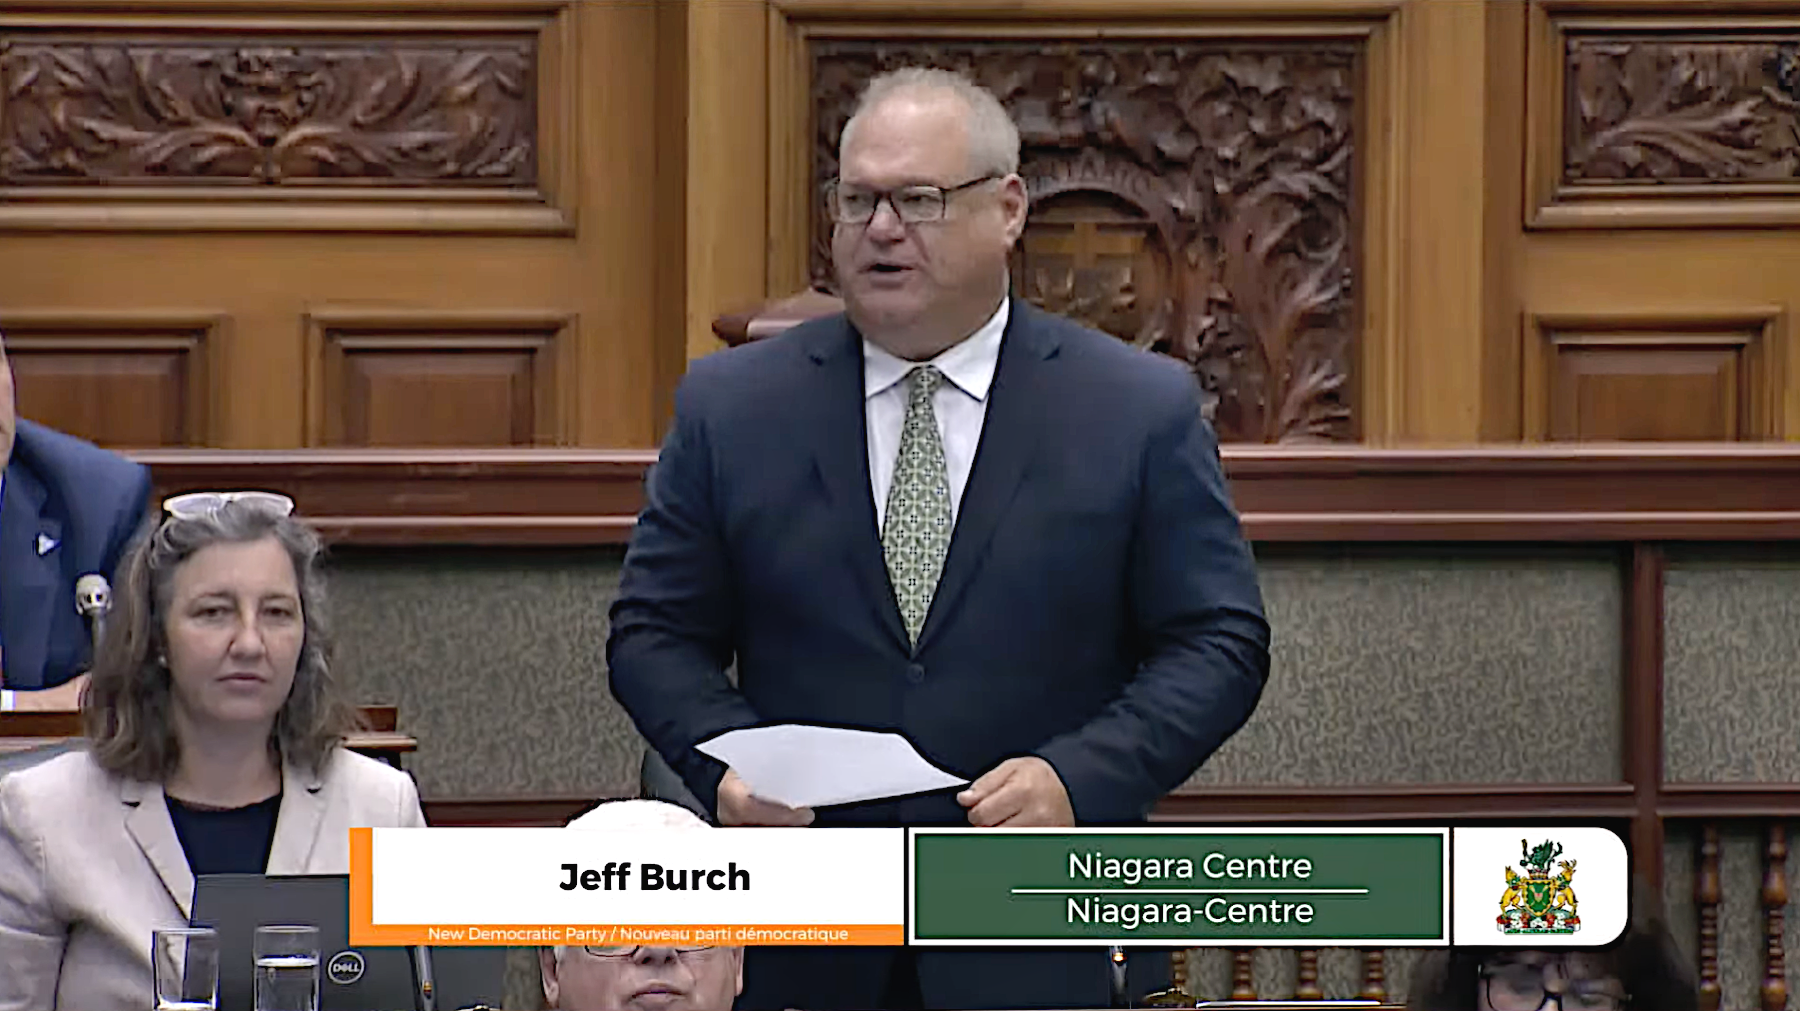 Screenshot of the broadcast of Question Period, on June 6, 2024. Jeff Burch, Member of Provincial Parliament (MPP) for Niagara Centre, is speaking. He has white and grey hair, glasses, a tie, and a navy blue suit. In the background, there are wood panels on the walls with intricate carvings.